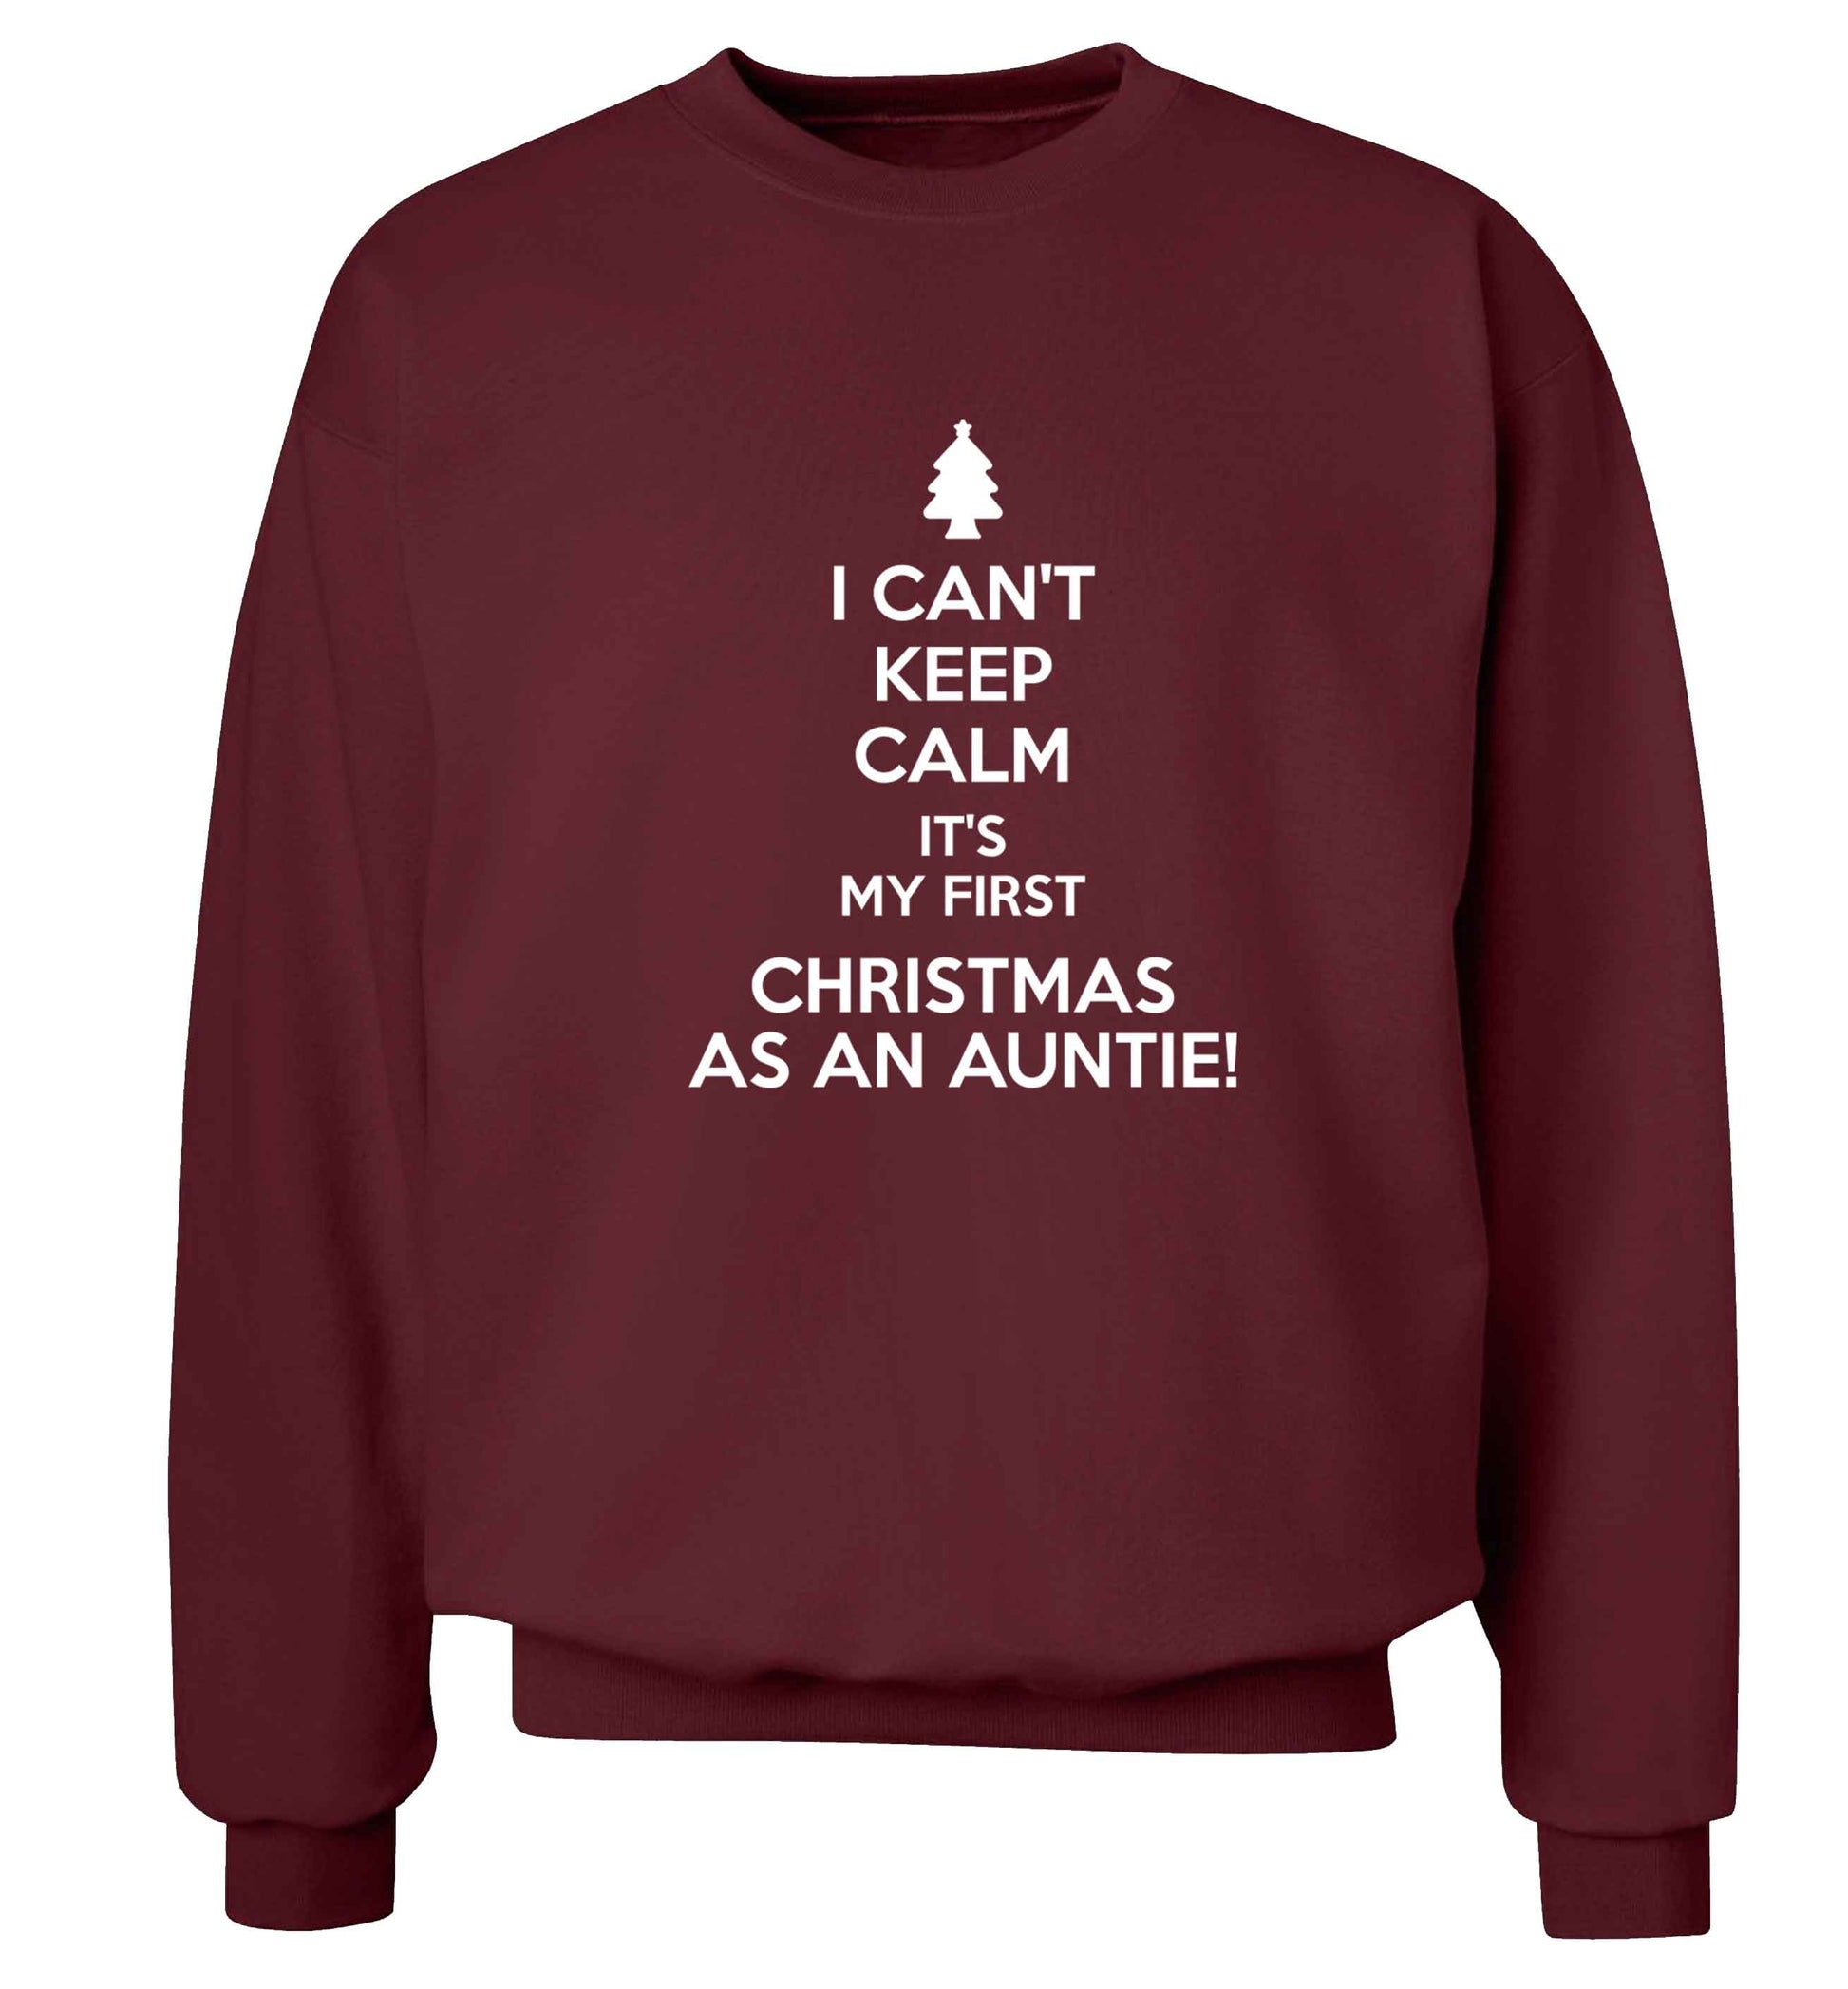 I can't keep calm it's my first Christmas as an auntie! Adult's unisex maroon Sweater 2XL